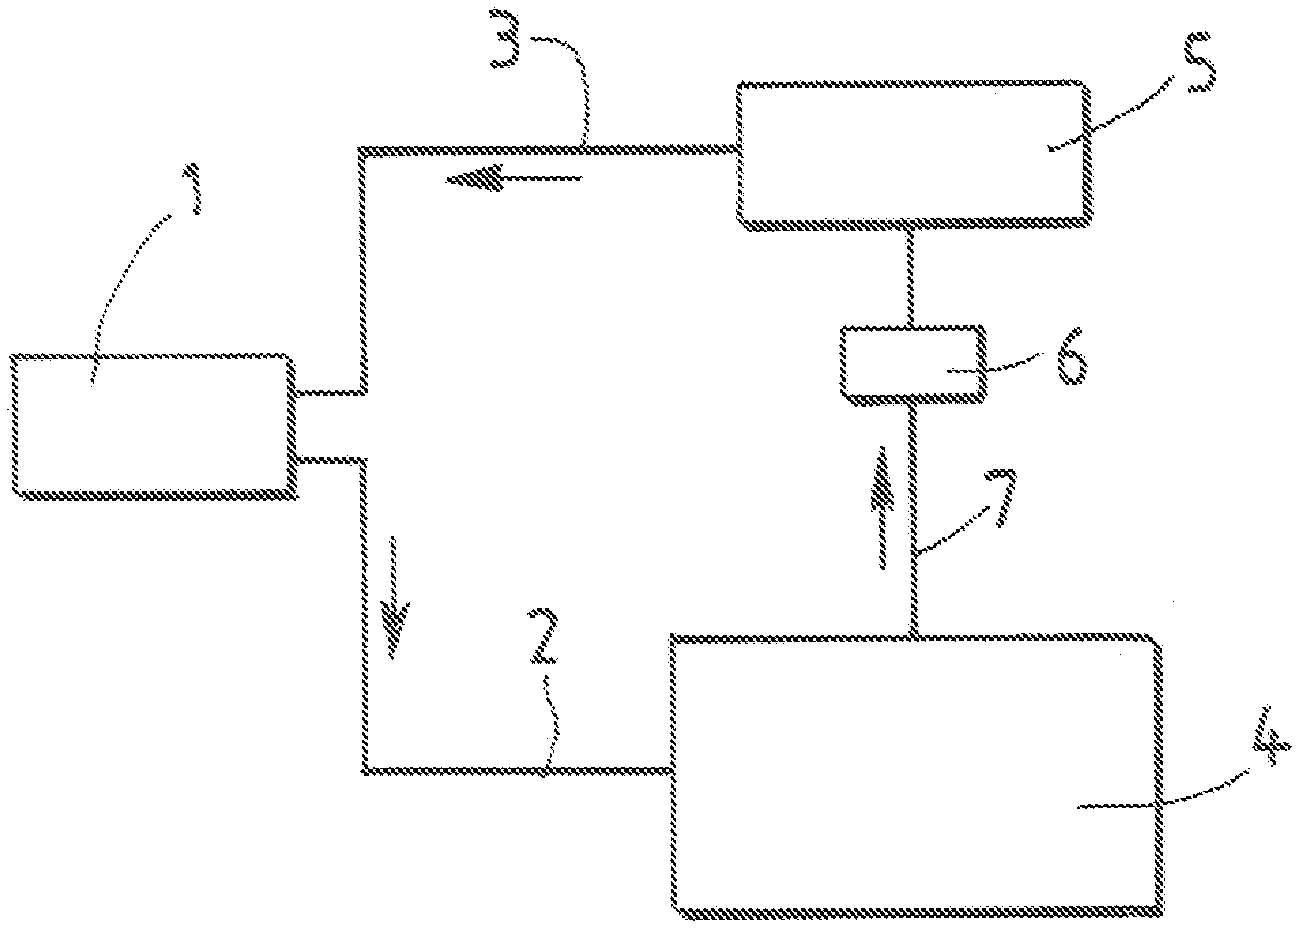 Motor vehicle air-conditioning loop comprising a volume expansion chamber